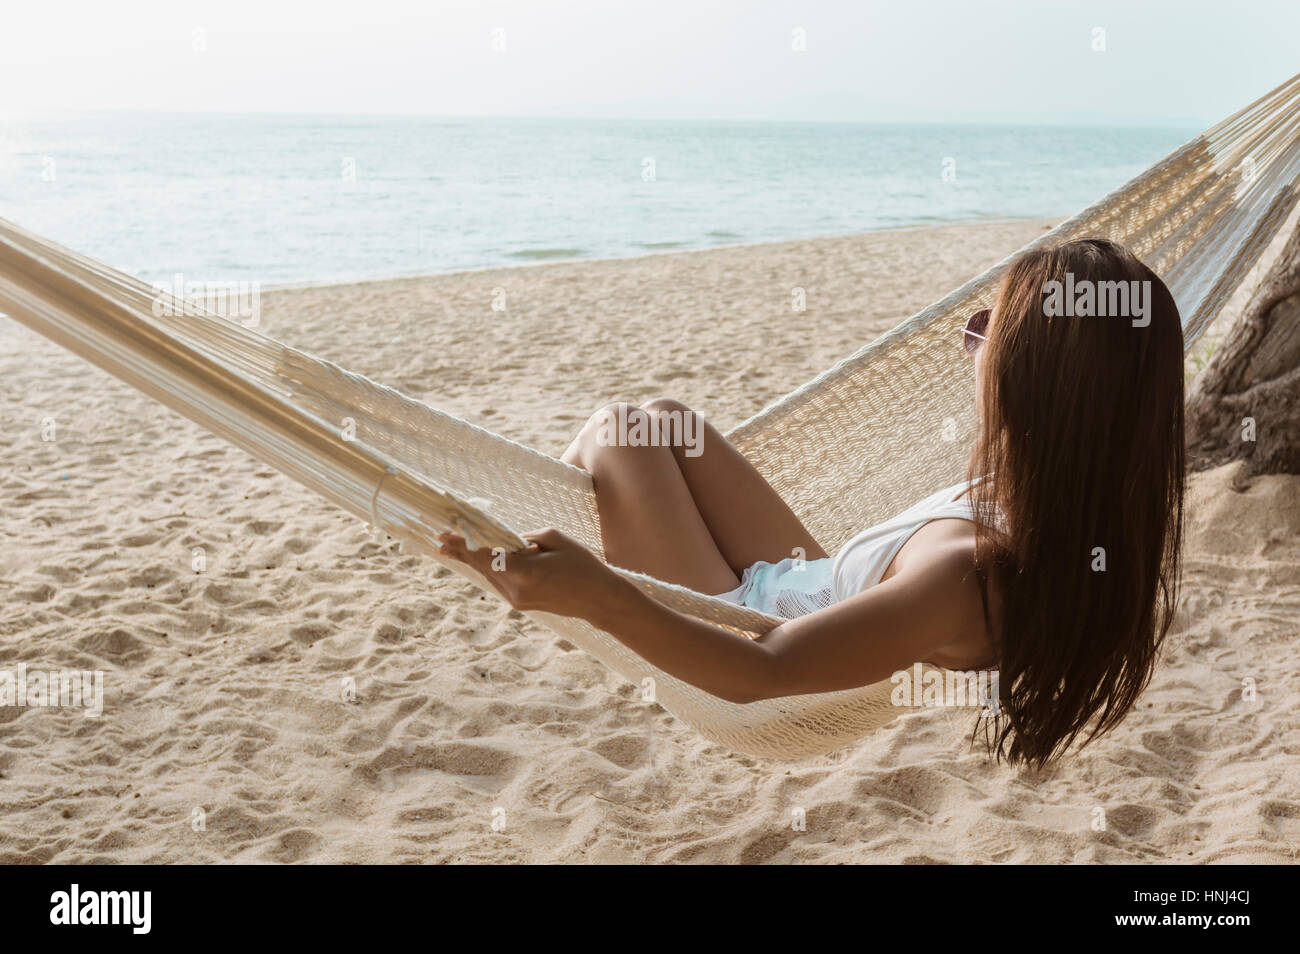 Woman relaxing on hammock at beach Banque D'Images